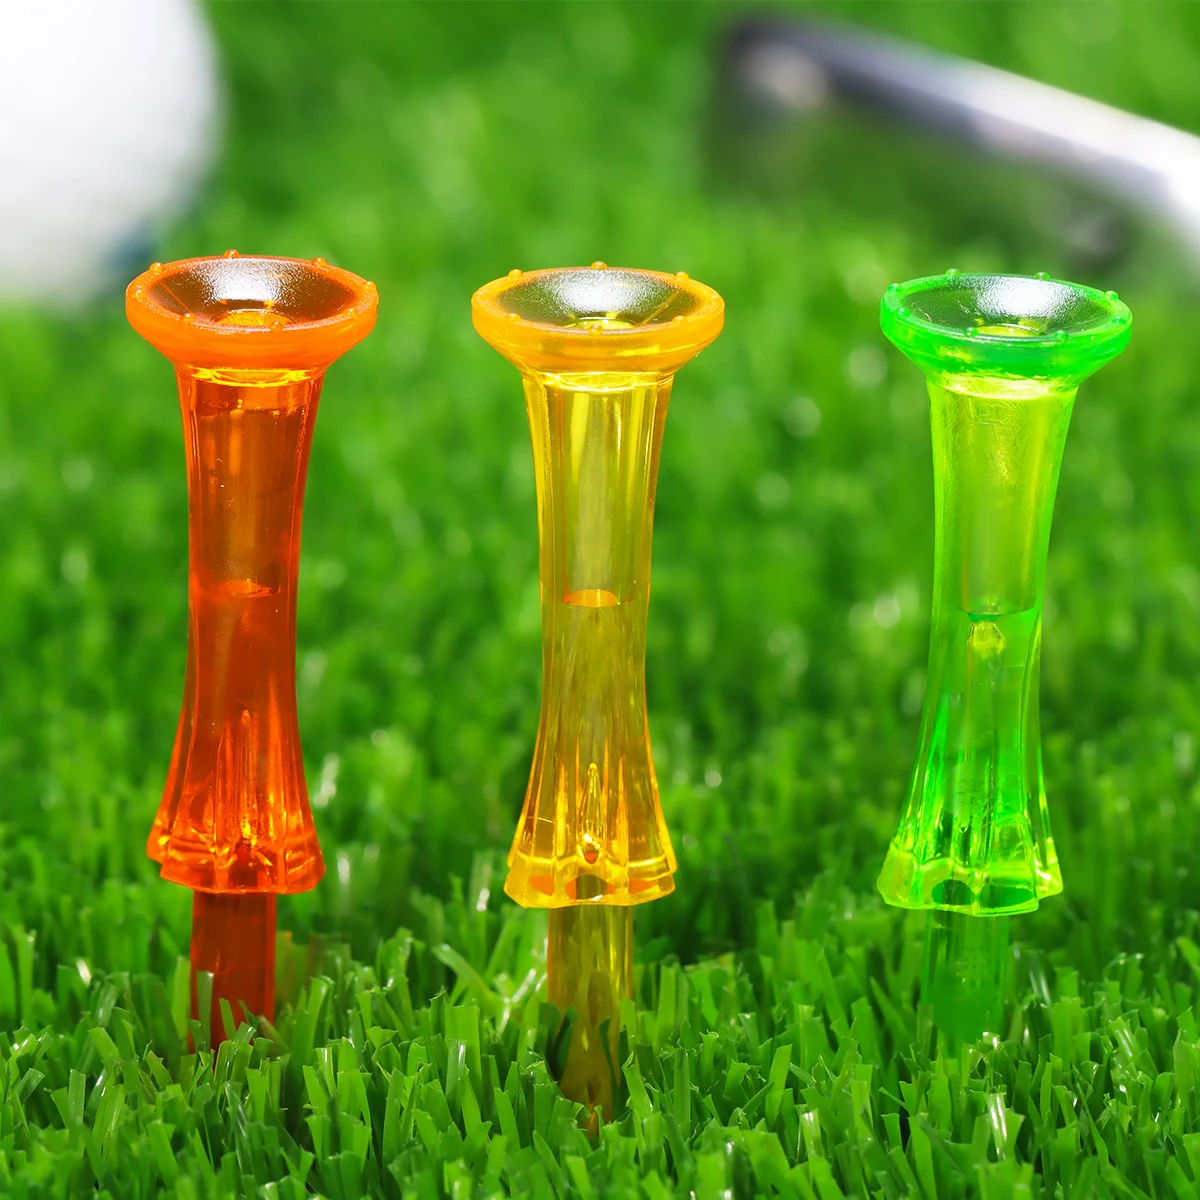 Golf Tees Plastic Unbreakable Teewide 80mm (50PK) PC Material is Super Durable Golf Tees Unbreakable Step Down Plastic Mixed